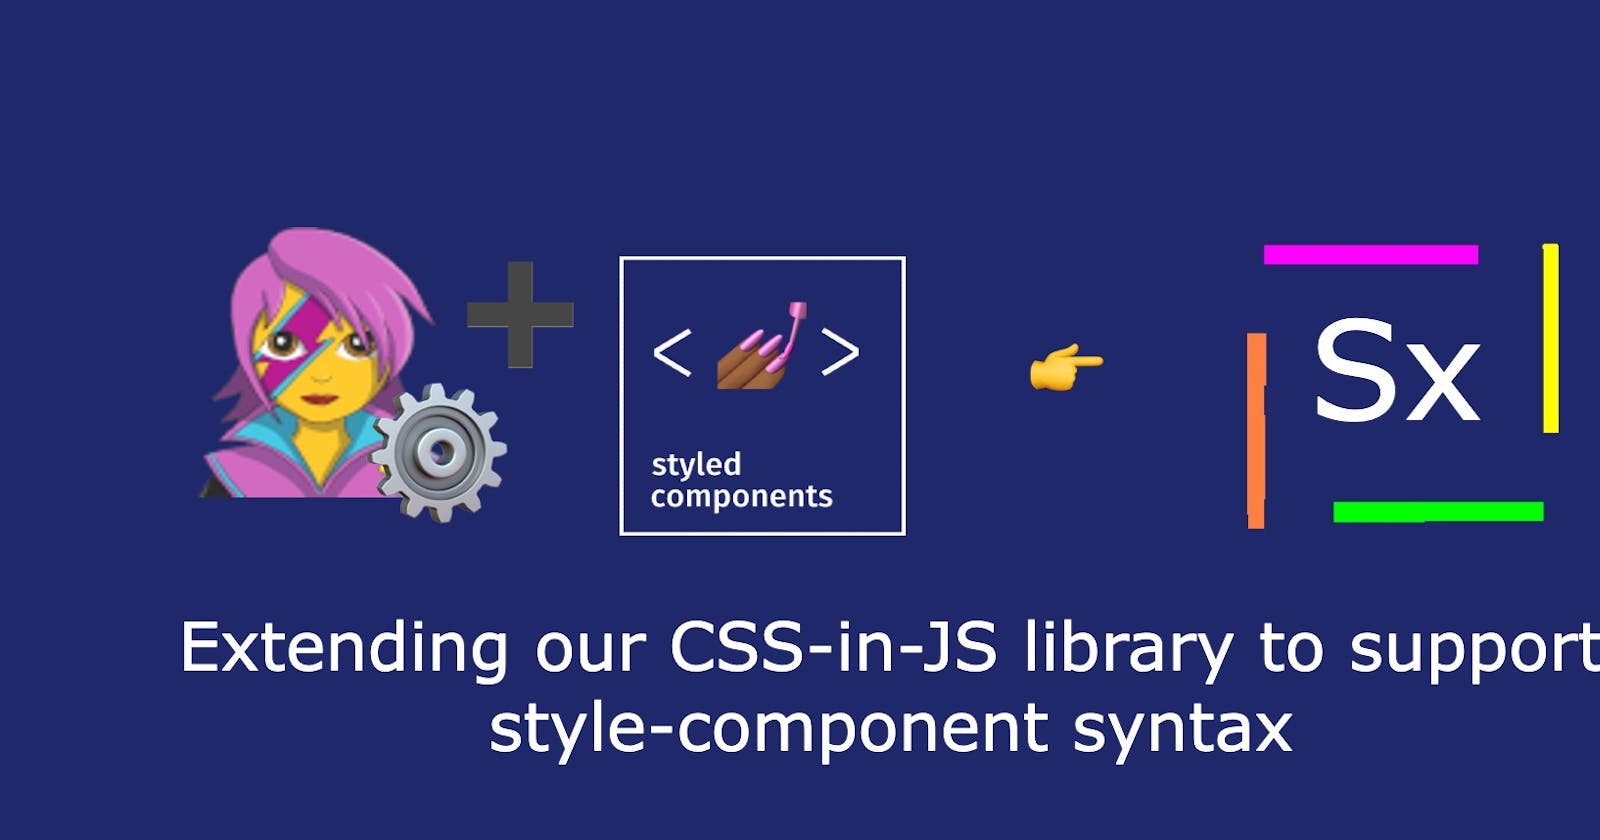 Extending our CSS-in-JS to support style-component syntax